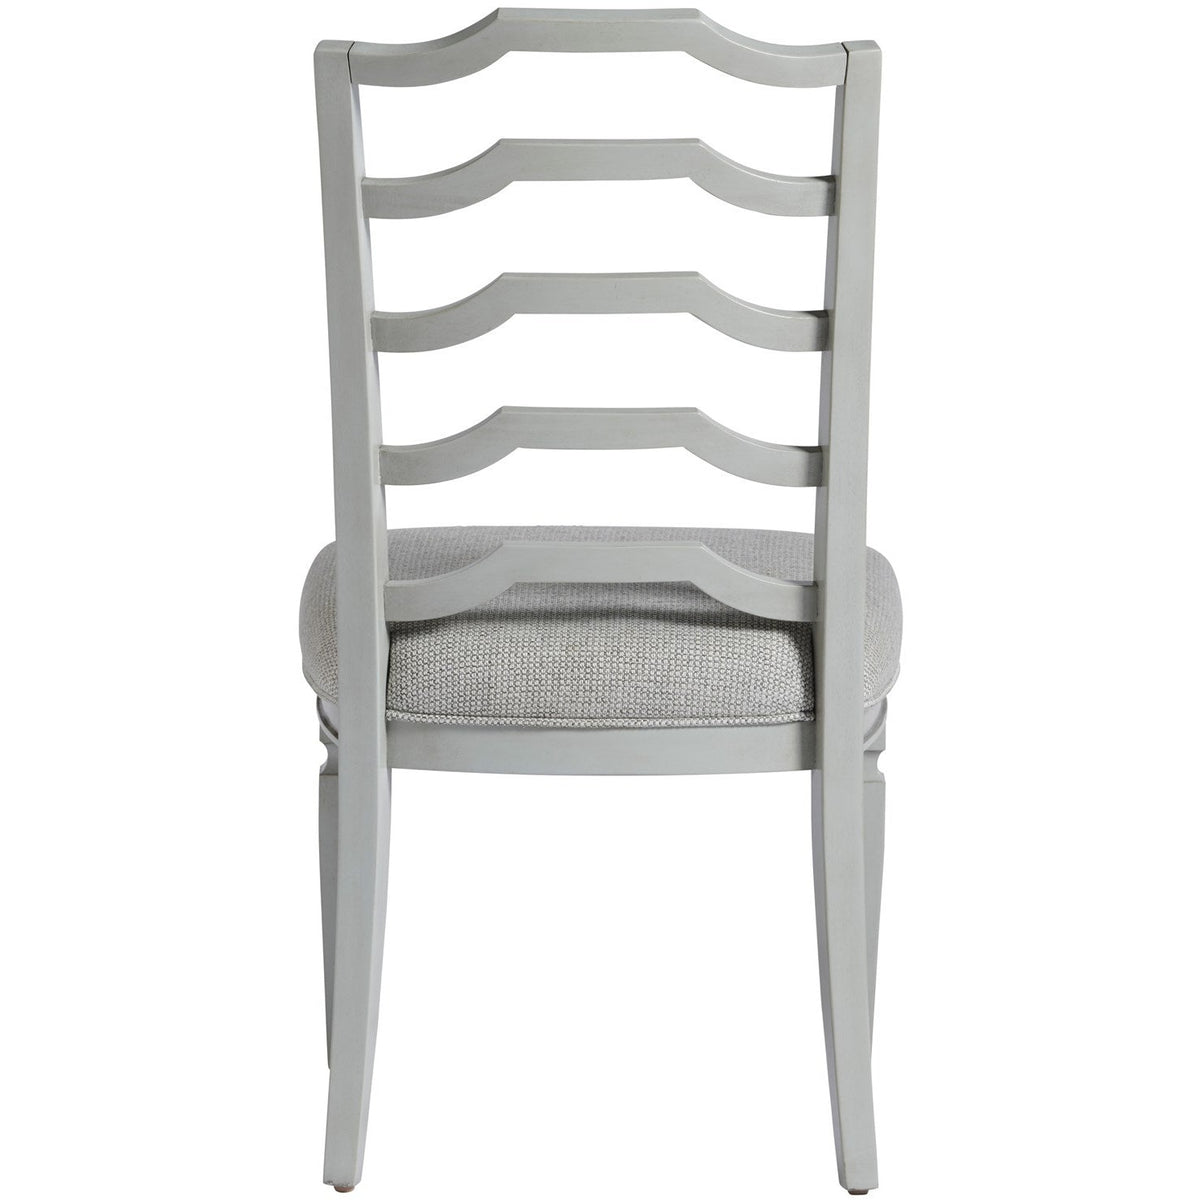 Ladder Back Side Chair - Be Bold Furniture